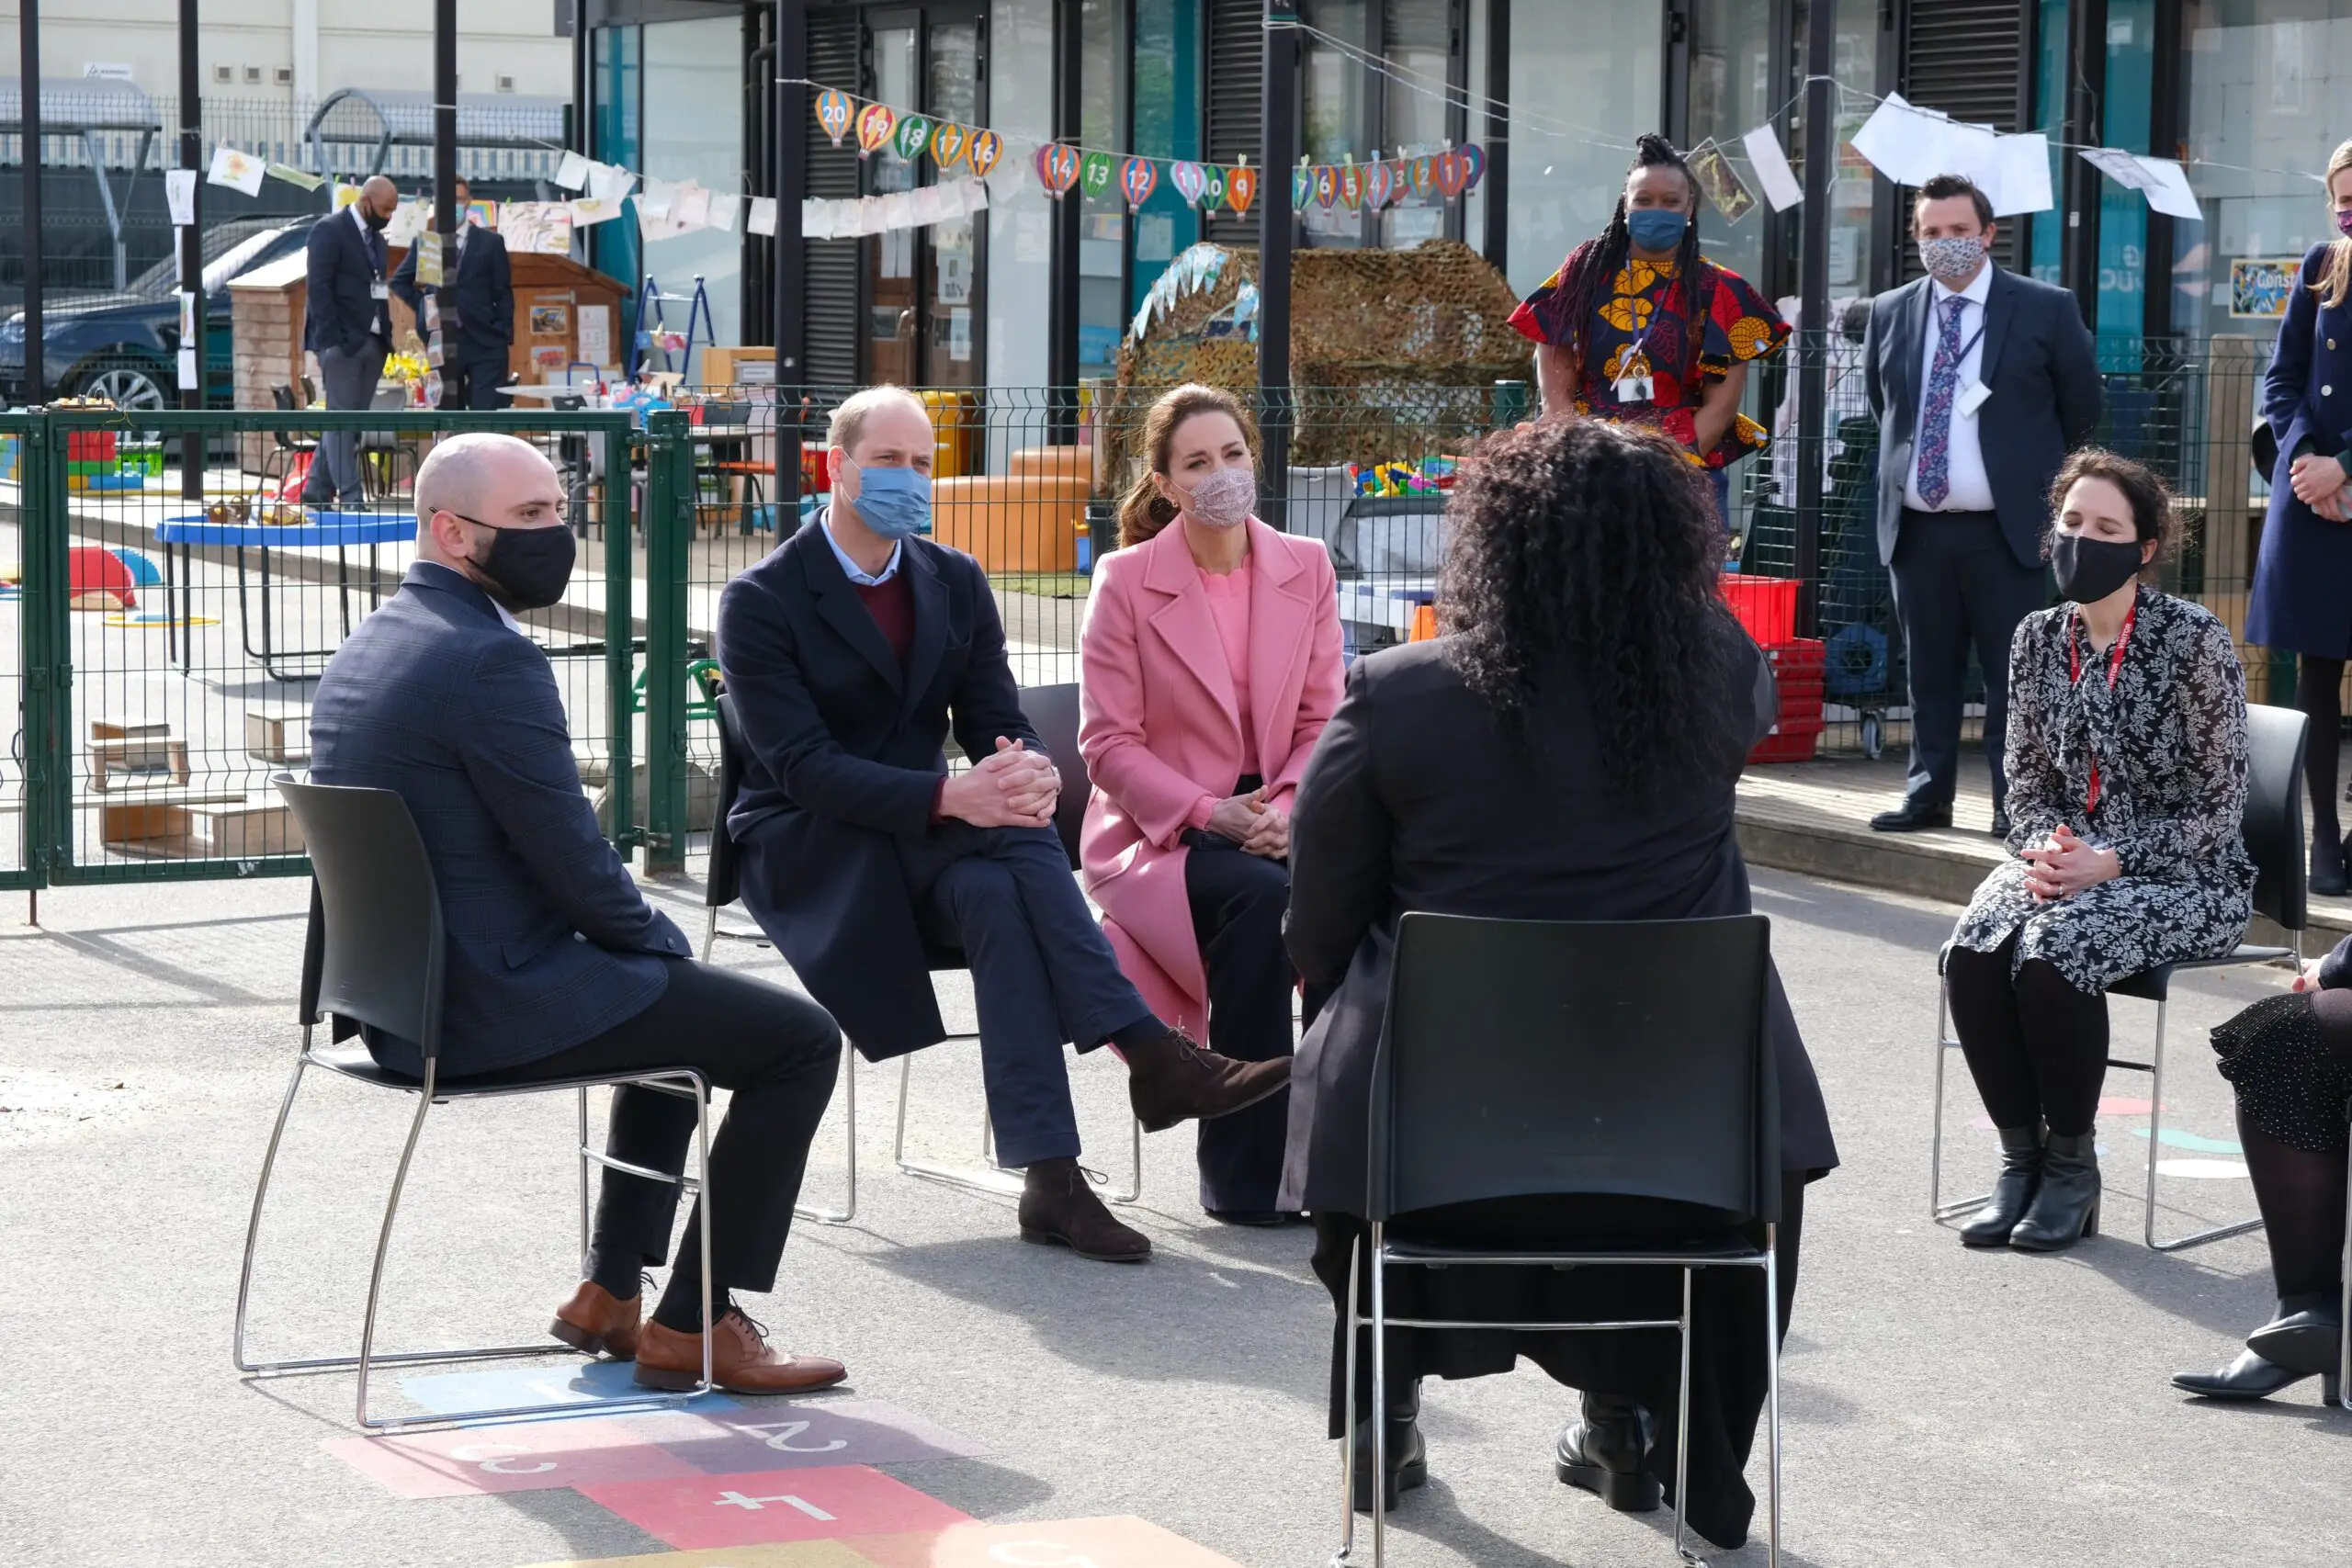 Prince William and Catherine held a small briefing with the school teachers during the visit.